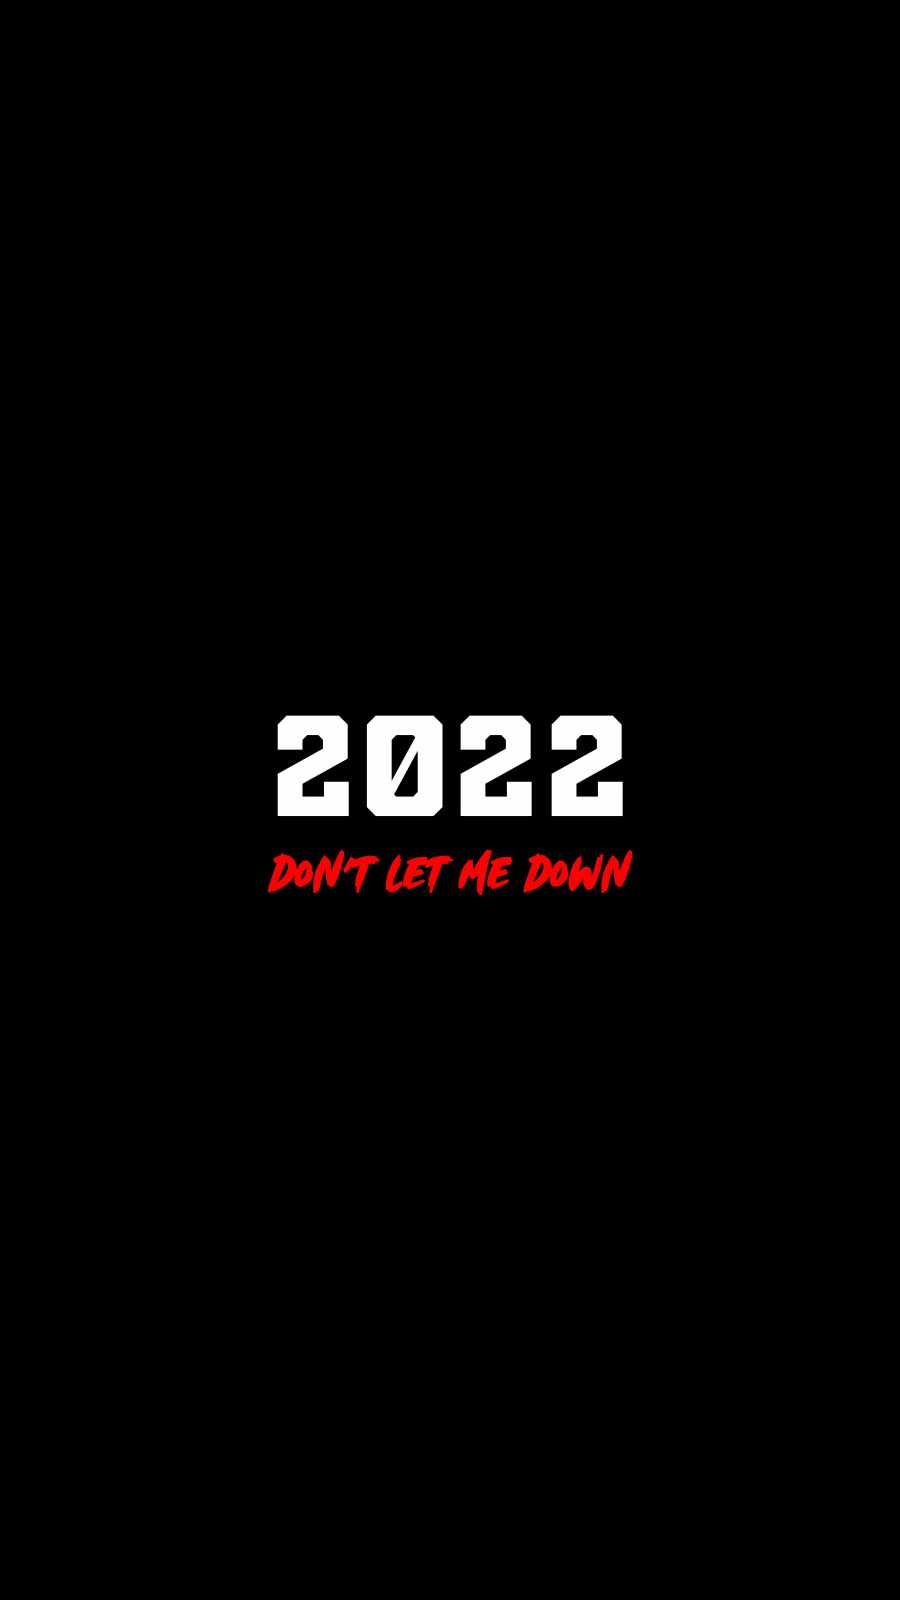 2022 Dont Let me Down iPhone Wallpaper